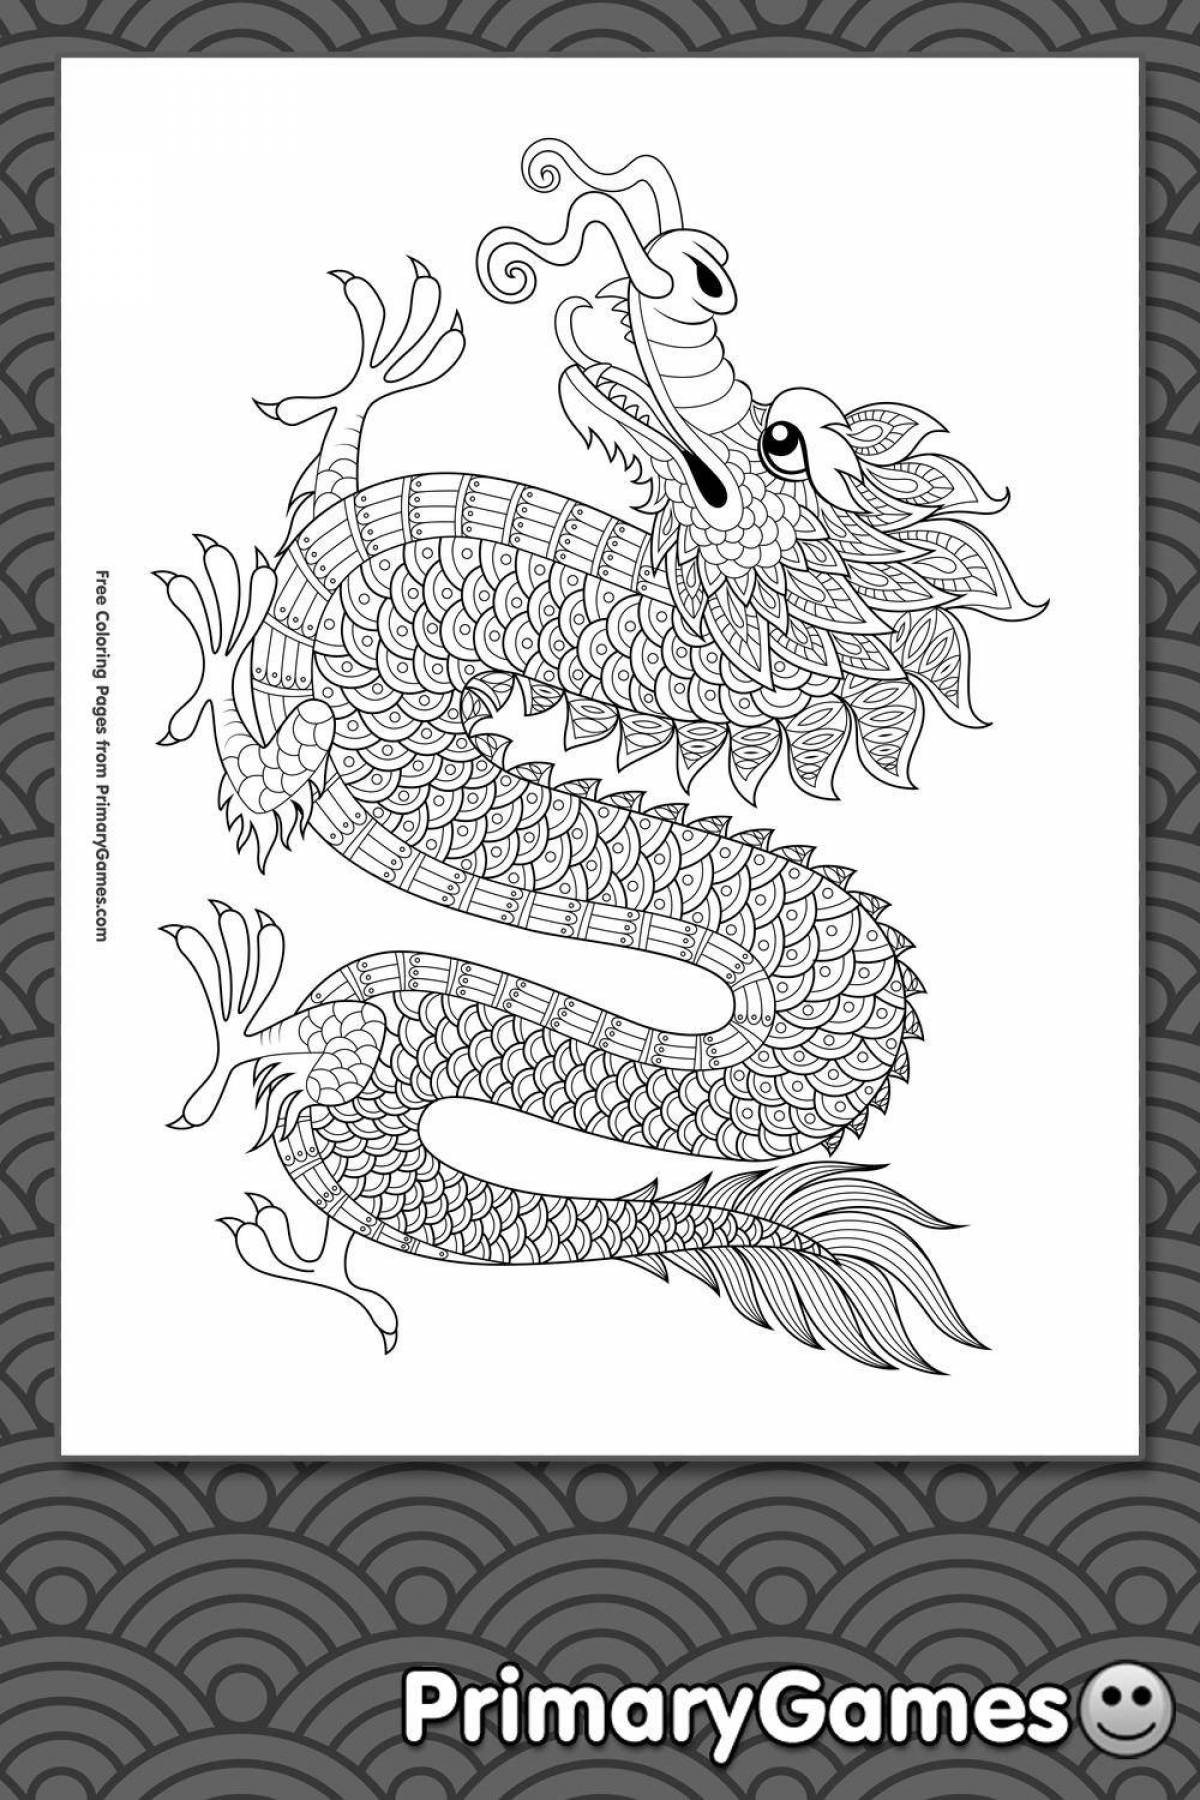 Chinese dragon coloring page playful for kids